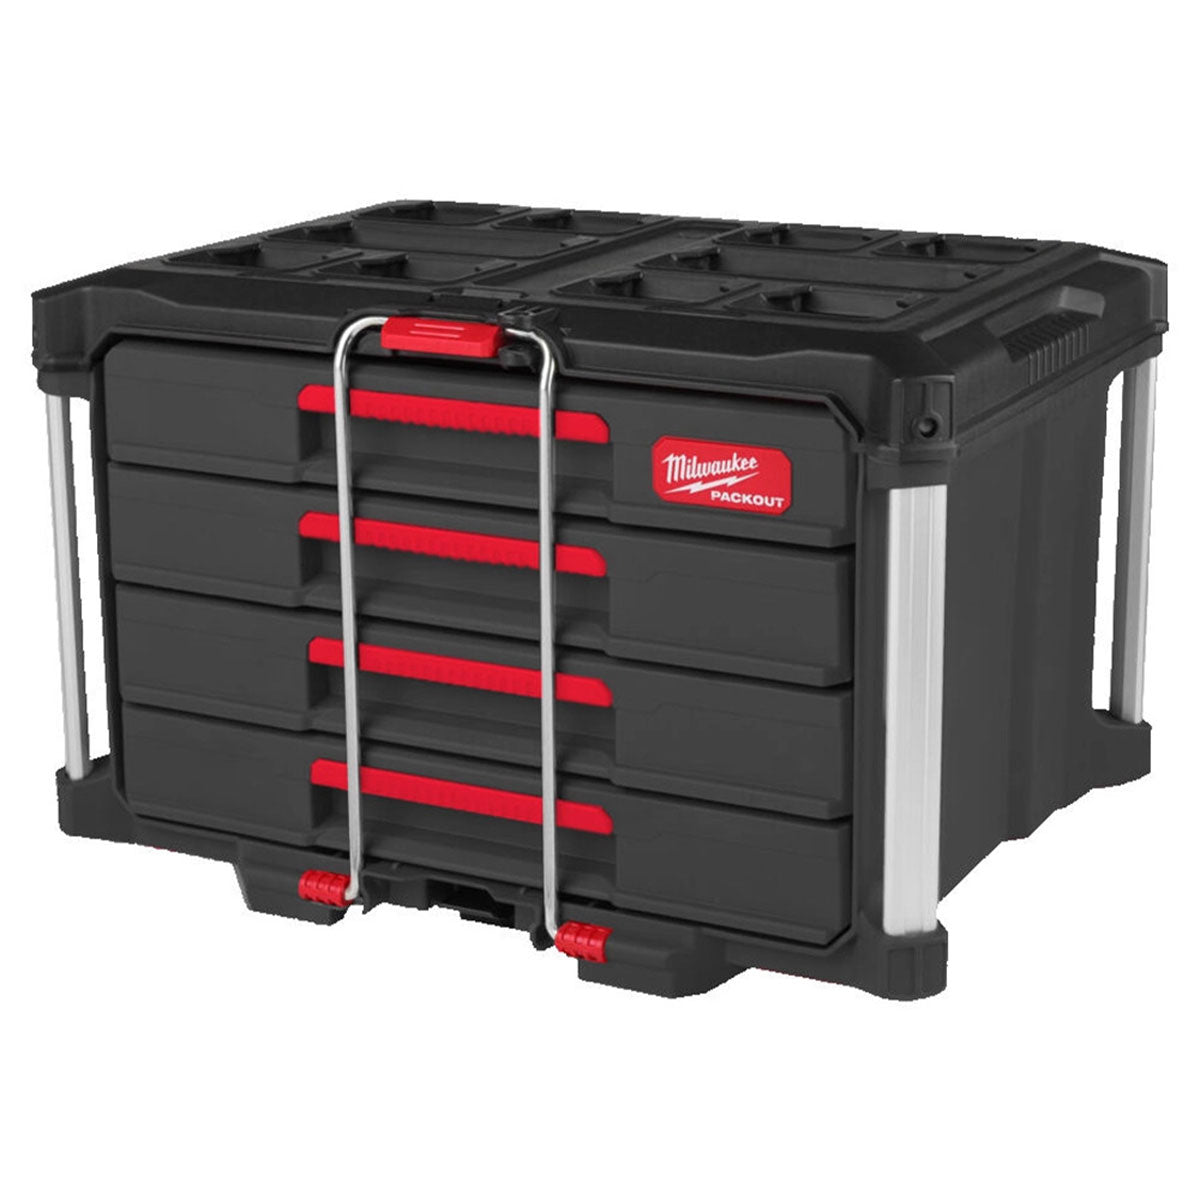 Milwaukee Packout 3 Drawer Tool Box with 4 Drawer Tool Box